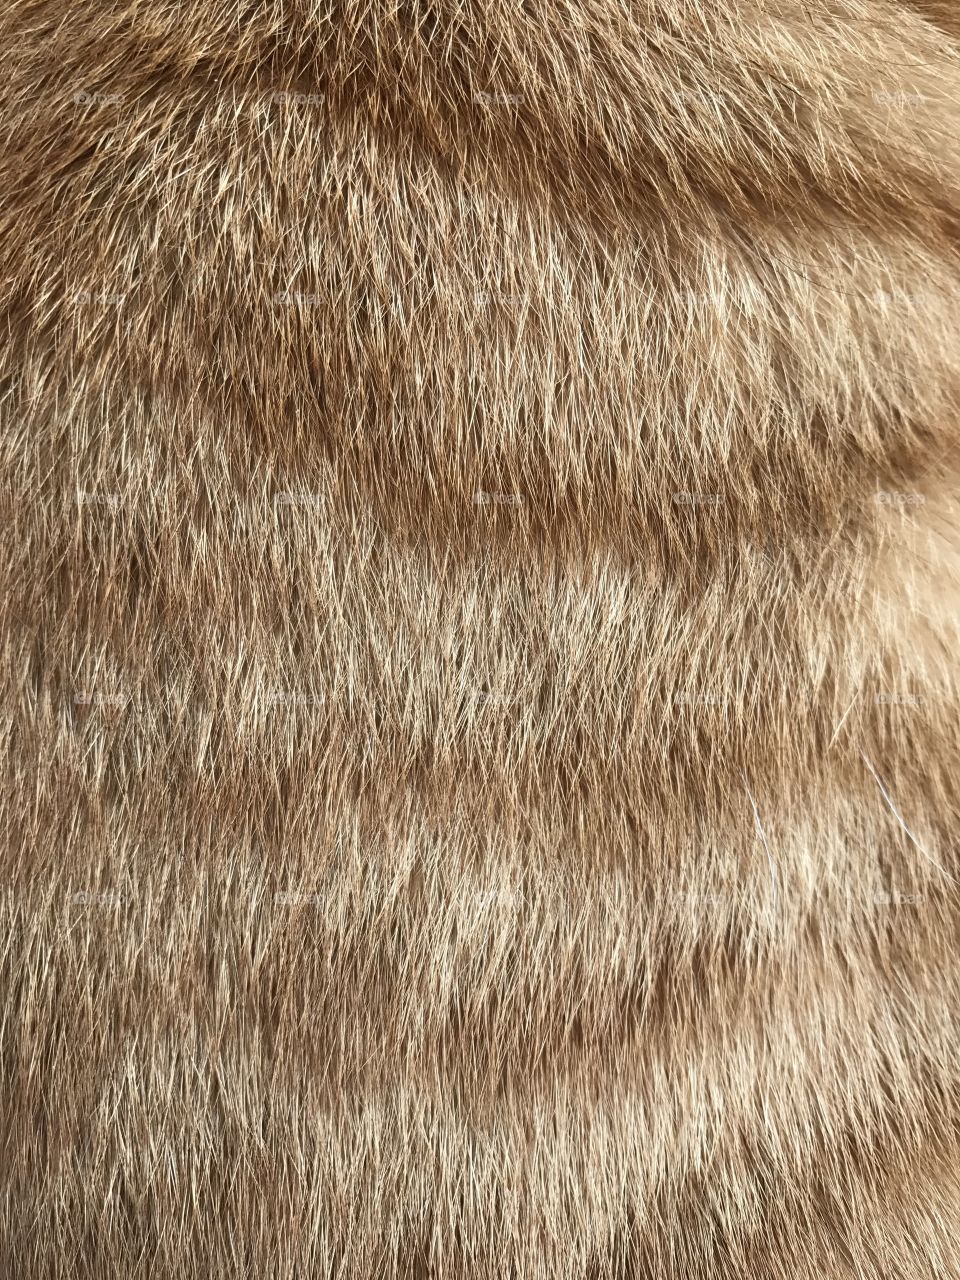 Cat fur. Texture or background.